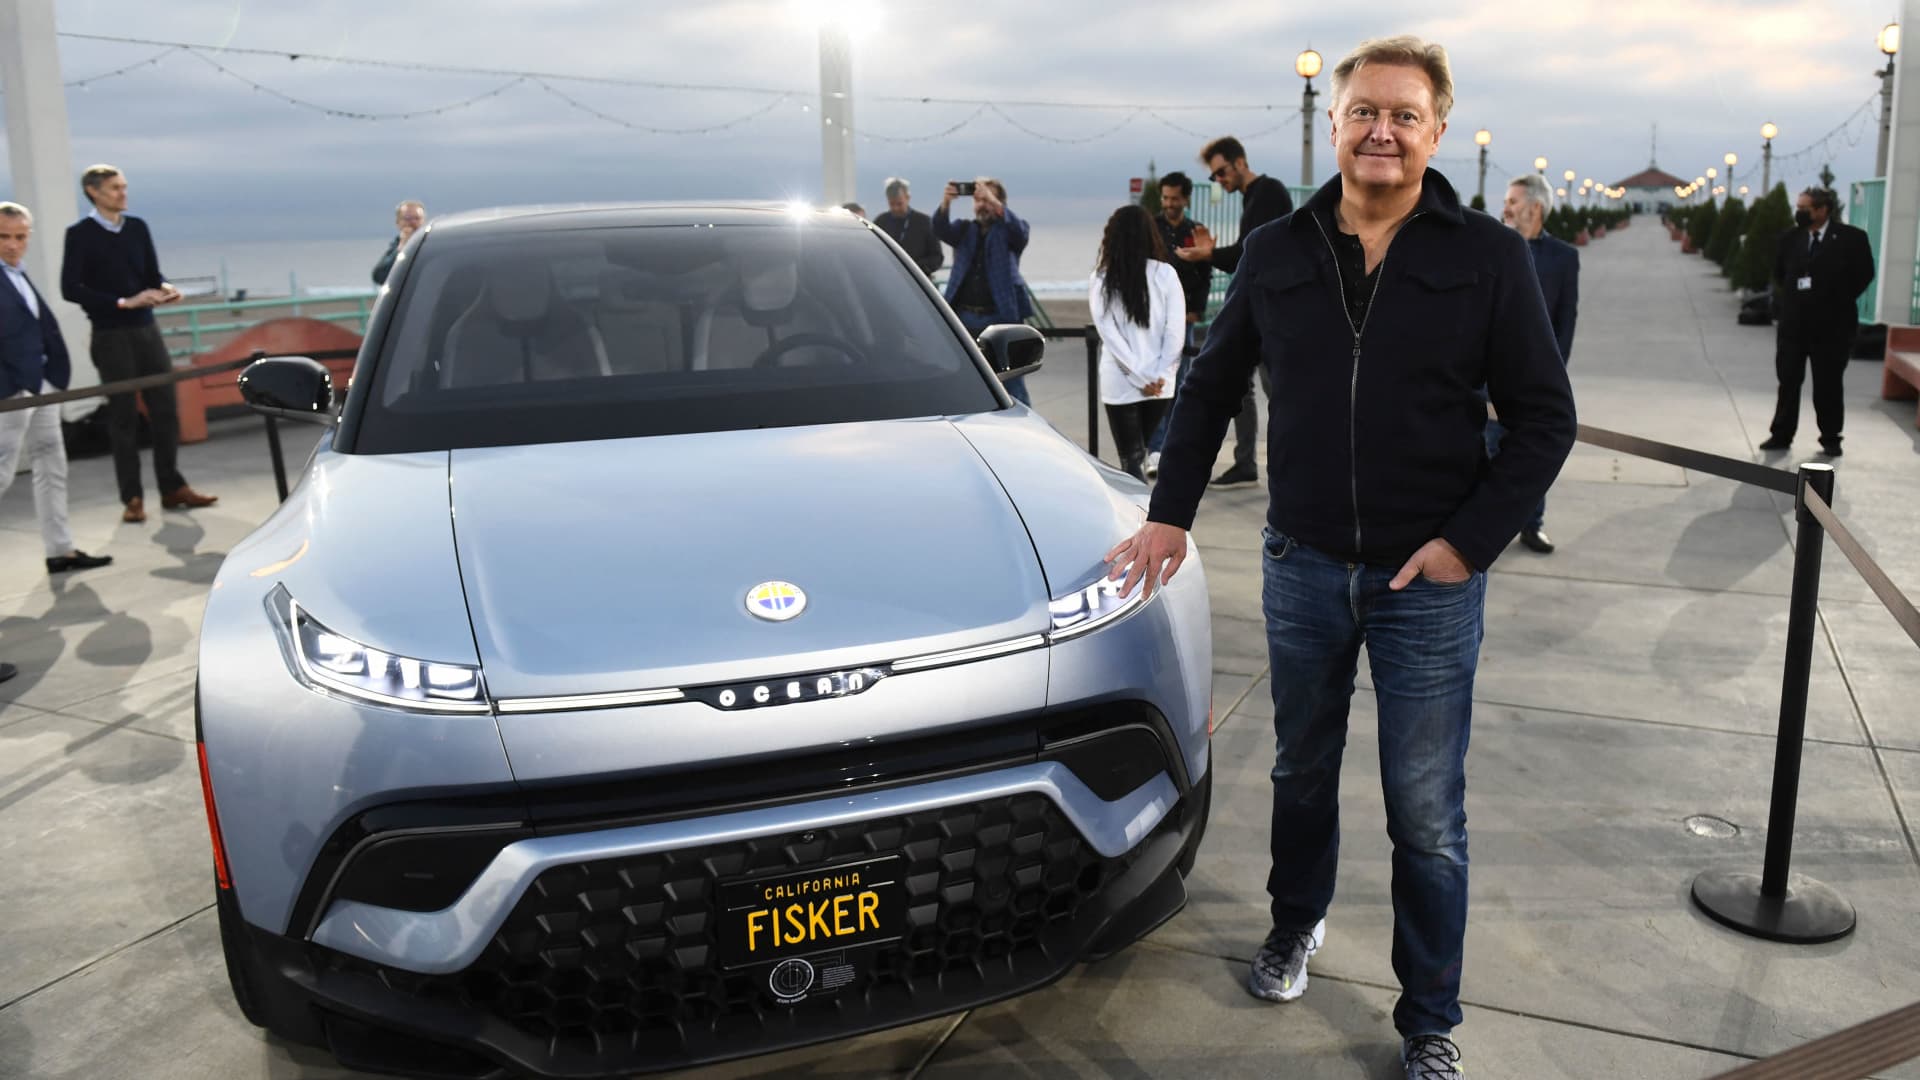 Henrik Fisker stands with the Fisker Ocean electric vehicle after it was unveiled at the Manhattan Beach Pier ahead of the Los Angeles Auto Show and AutoMobilityLA on November 16, 2021 in Manhattan Beach, California.